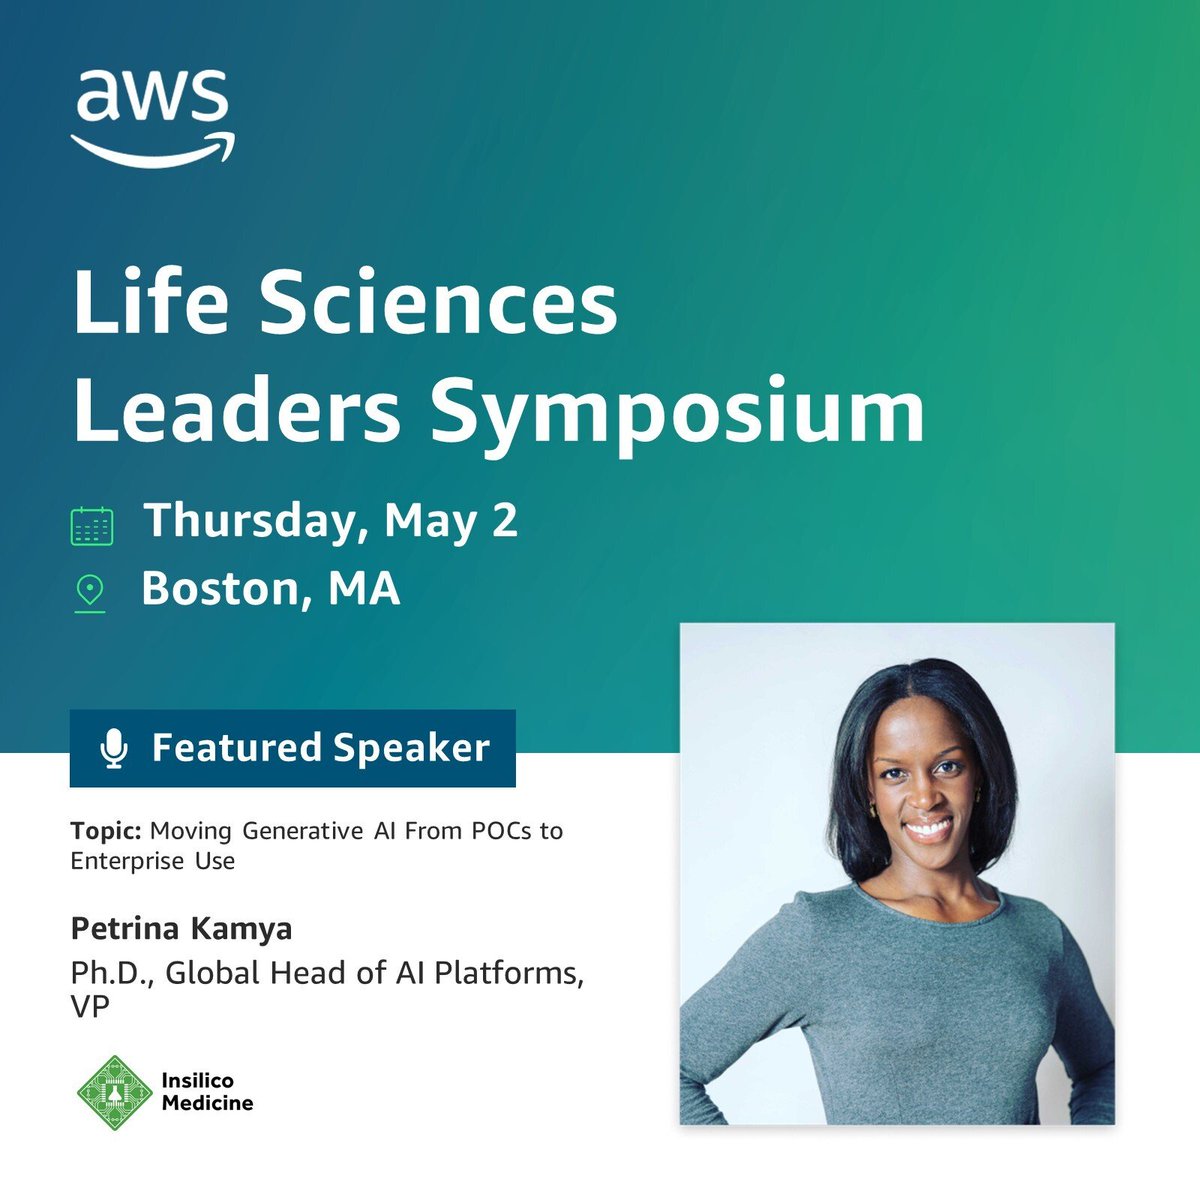 Petrina Kamya, Insilico's Global Head of AI Platforms, speaks on the panel 'Moving Generative AI From POCs to Enterprise Use' at the @awscloud Life Sciences Leaders Symposium in Boston May 2nd, 3-3:30pm alongside panelists from @TakedaINJ & @EPAMSystems. pages.awscloud.com/NAMER-event-T3…